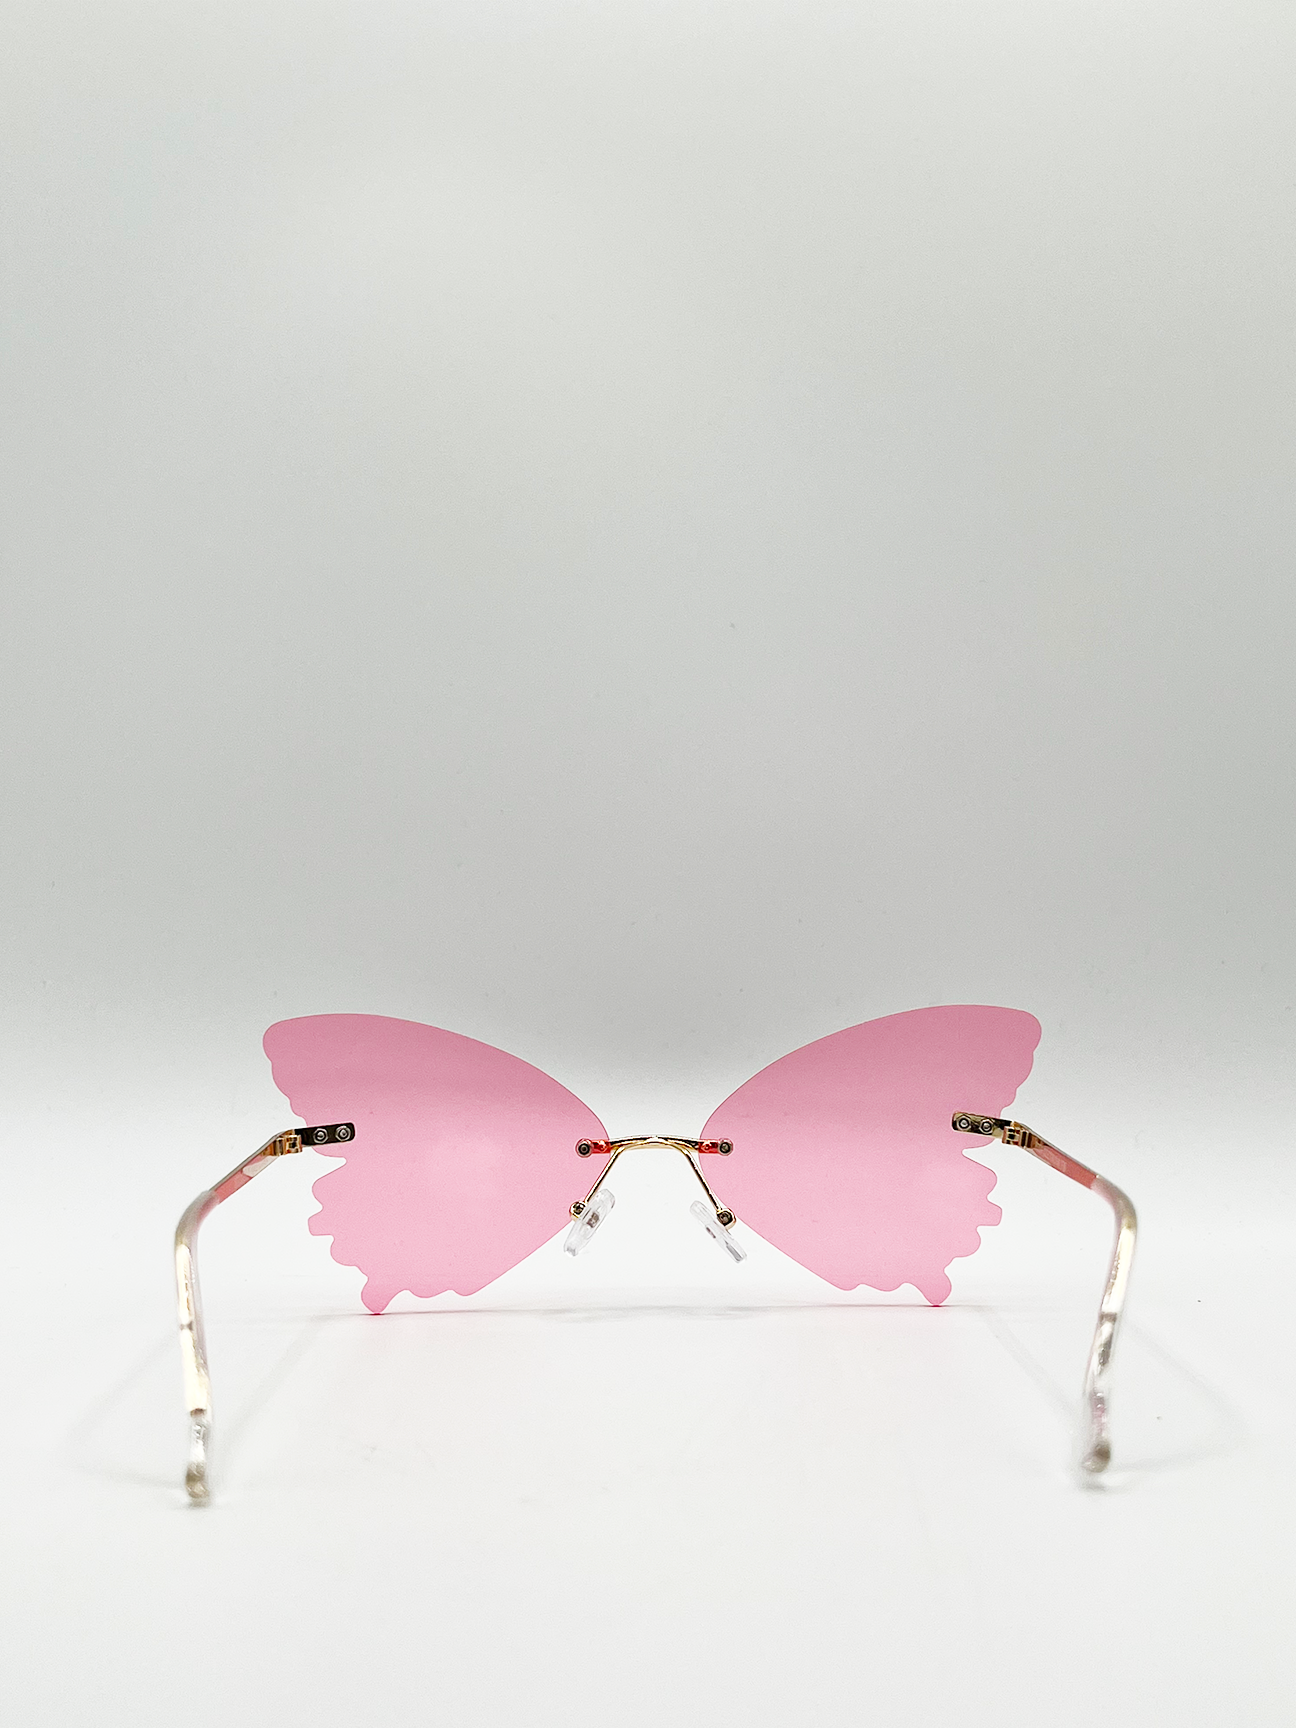 Frameless Pink Butterfly Sunglasses with Metal Arms